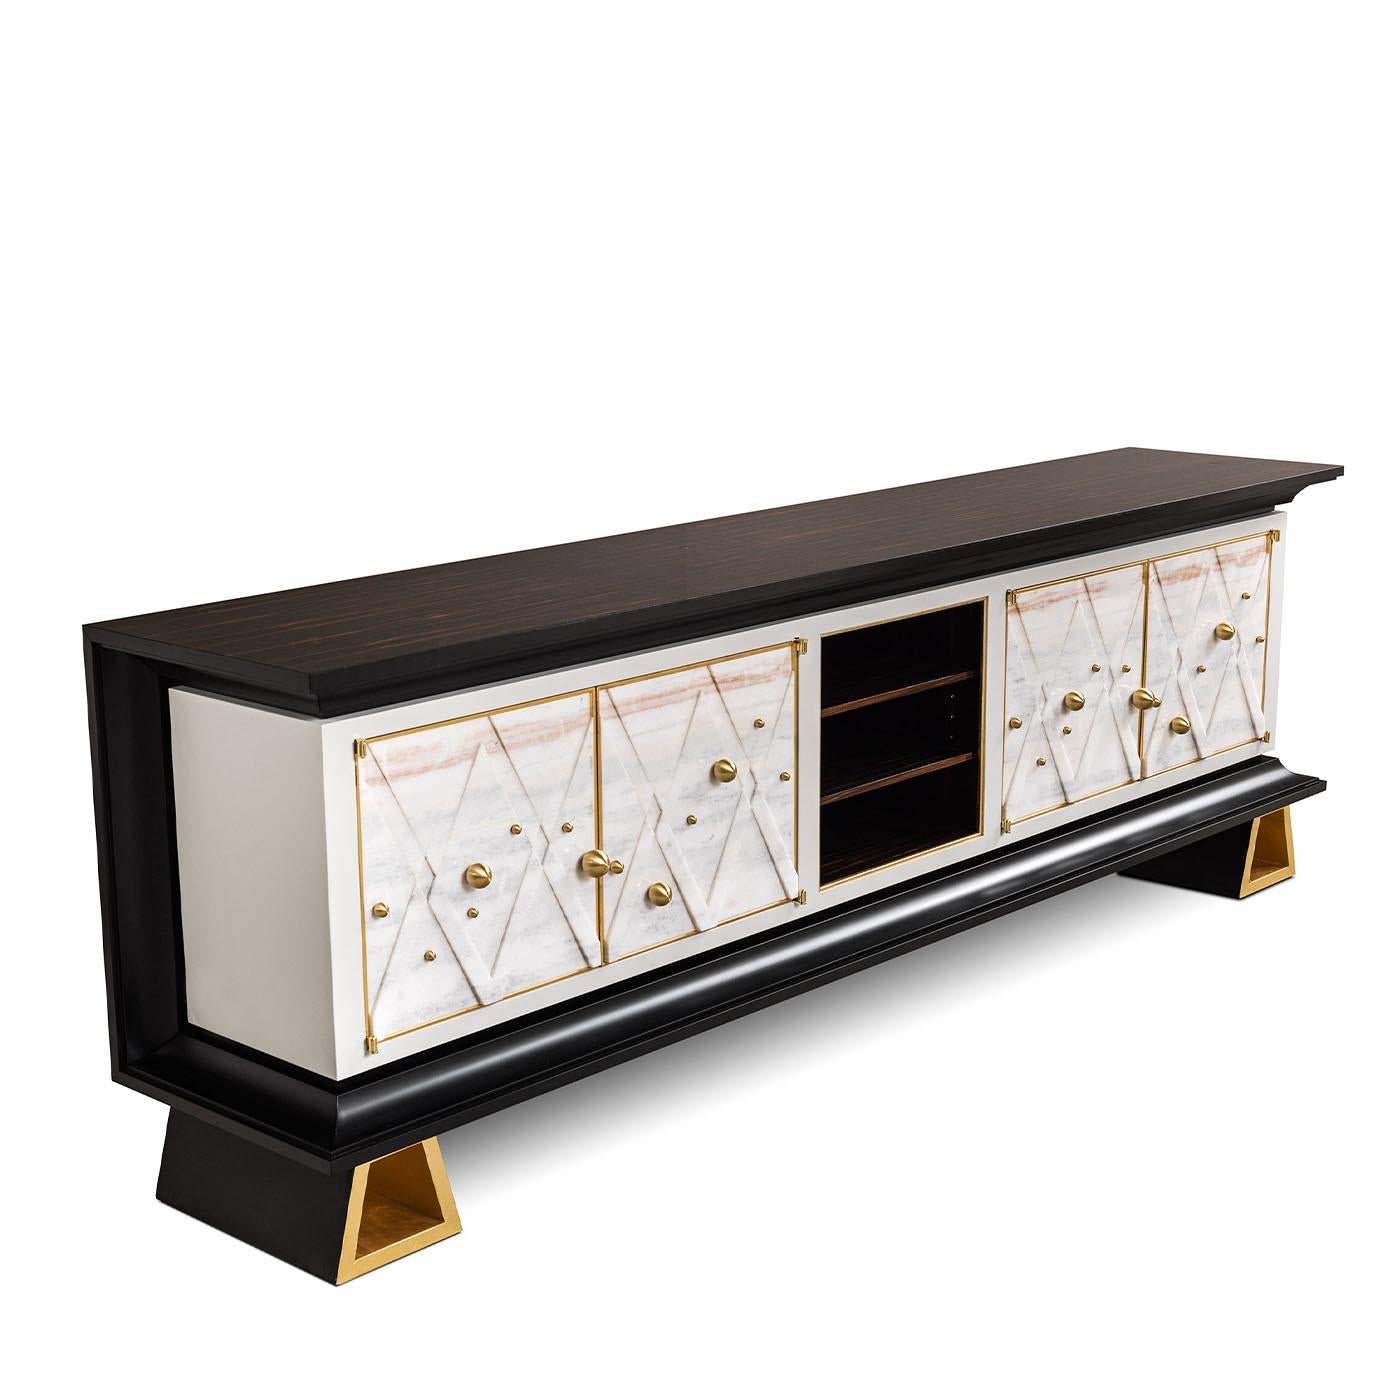 This elegant sideboard is composed of ebony and white lasa marble adorne with exclusive brass ornaments. Handcrafted and enriched with the detail of gold leaf finish feet.